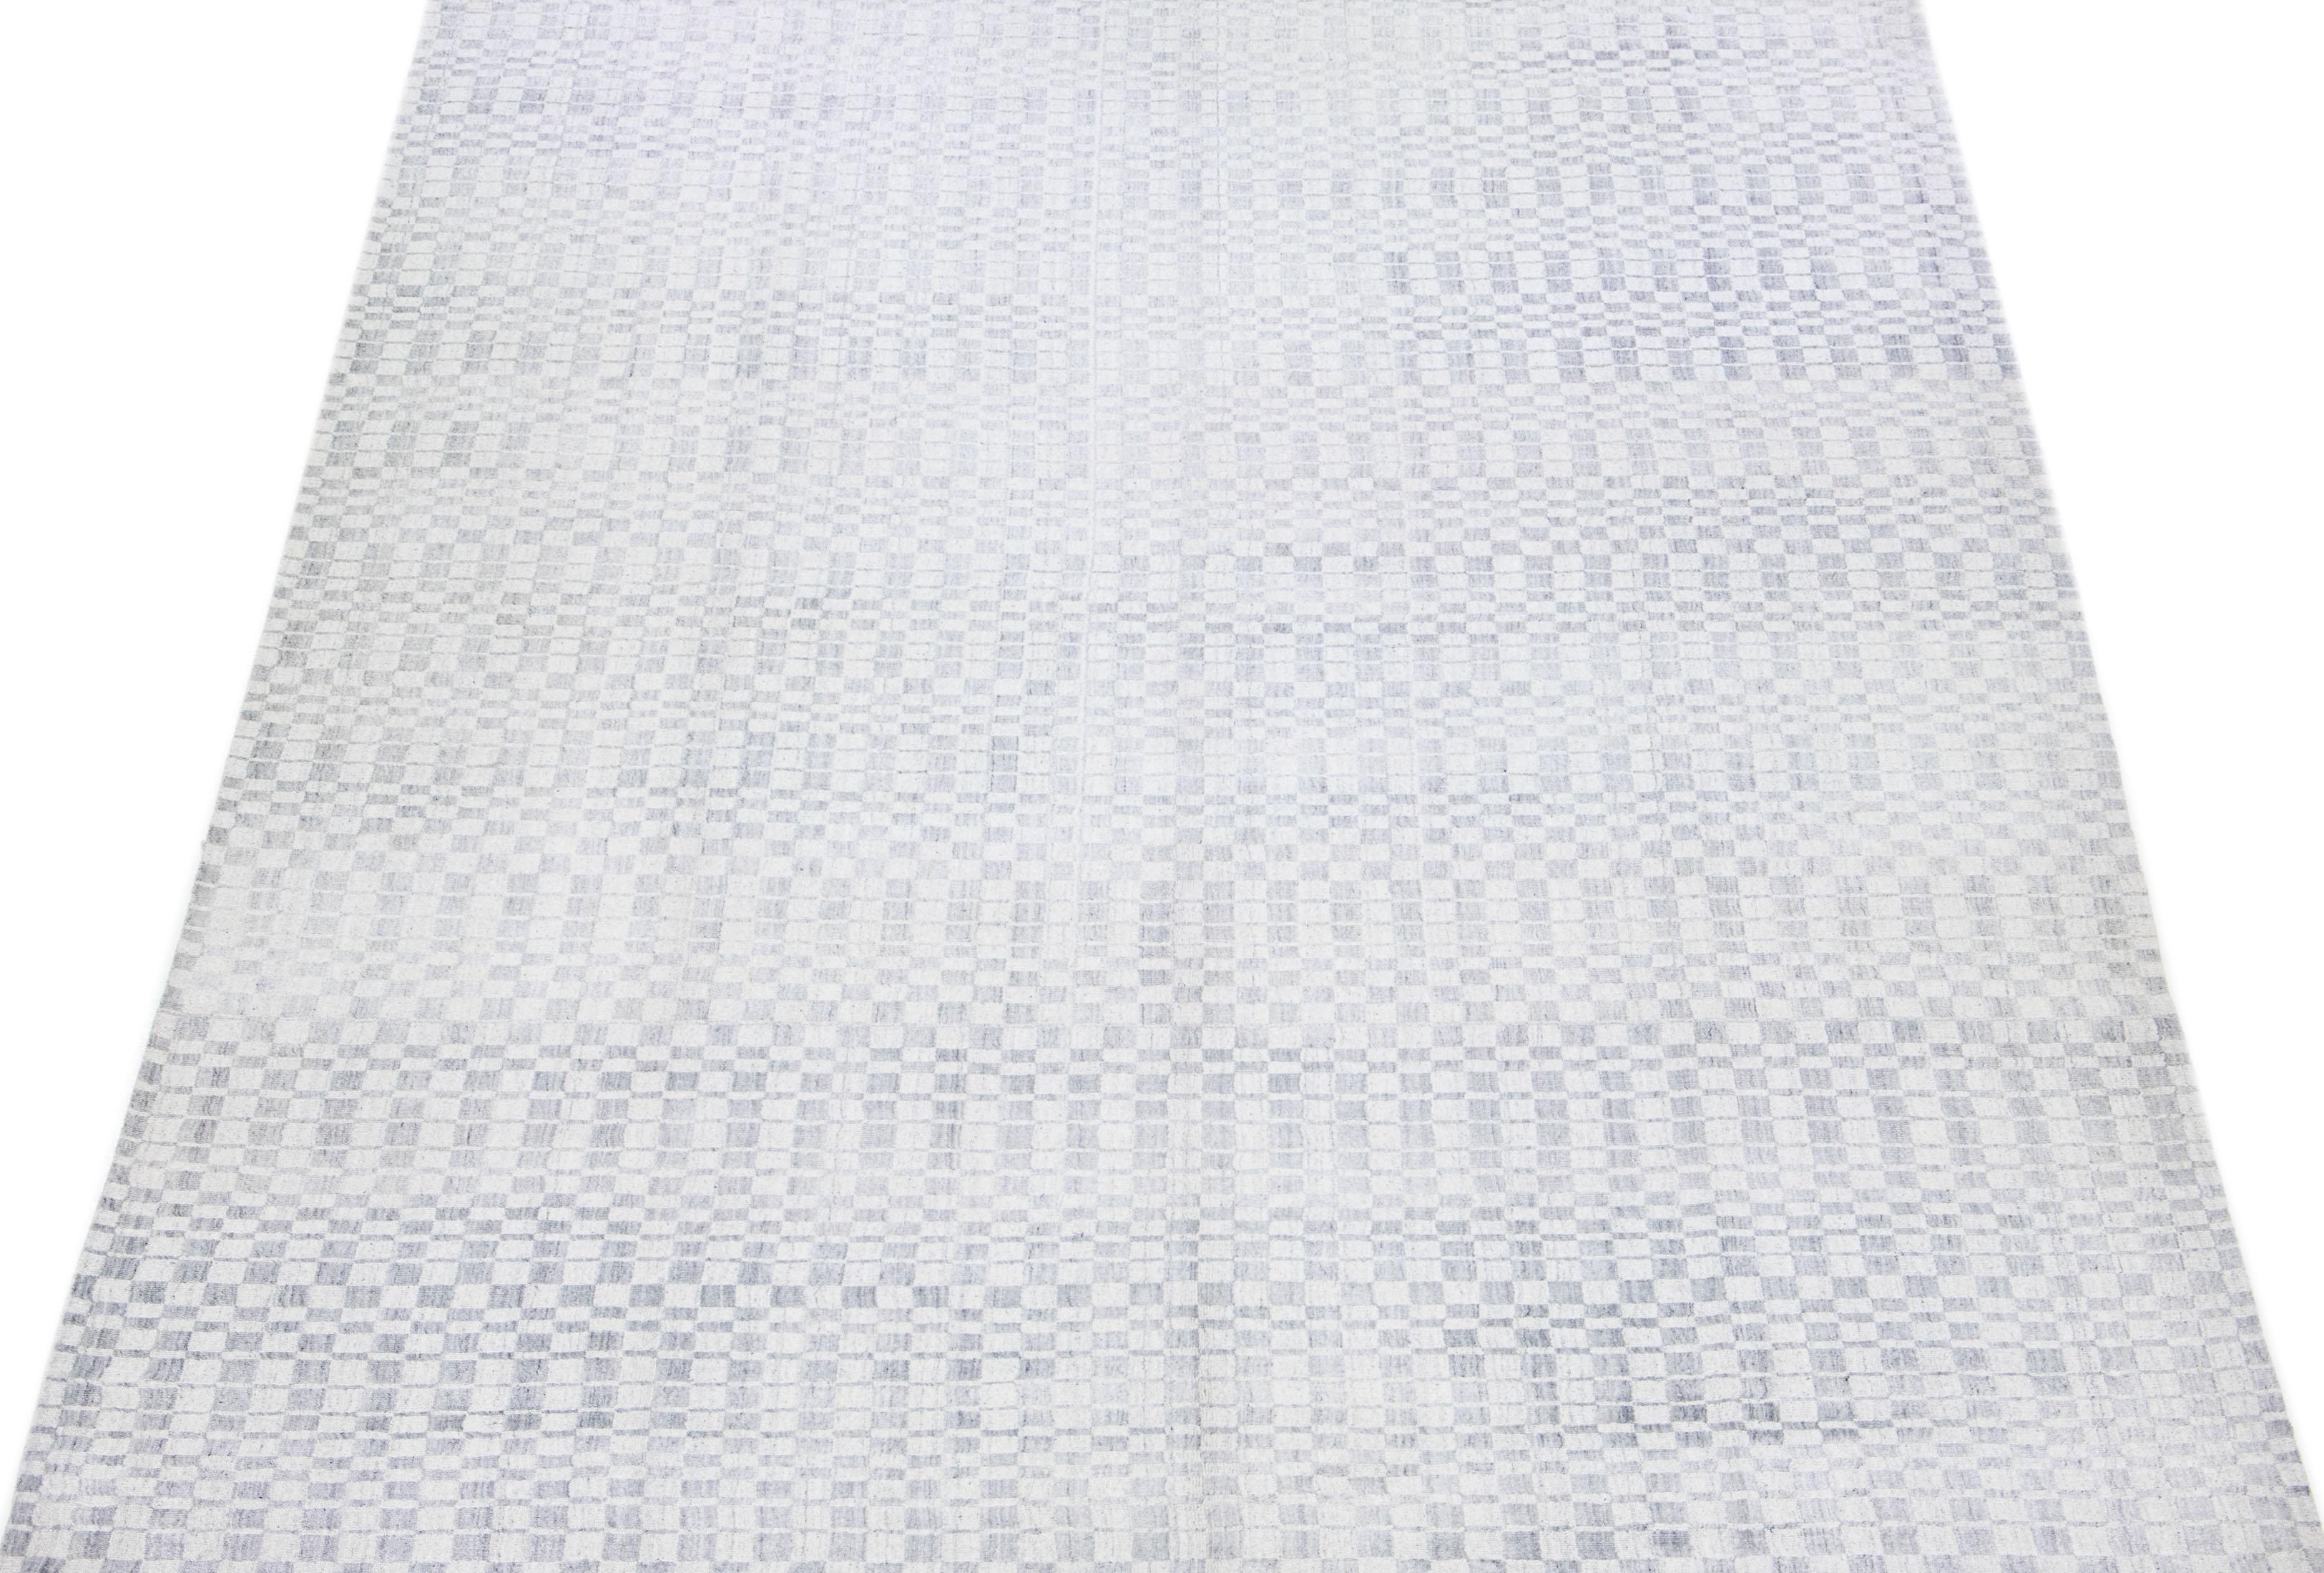 Beautiful modern wool & Silk rug with a grey field featuring a gorgeous seamless geometric design.

This rug measures 9'11